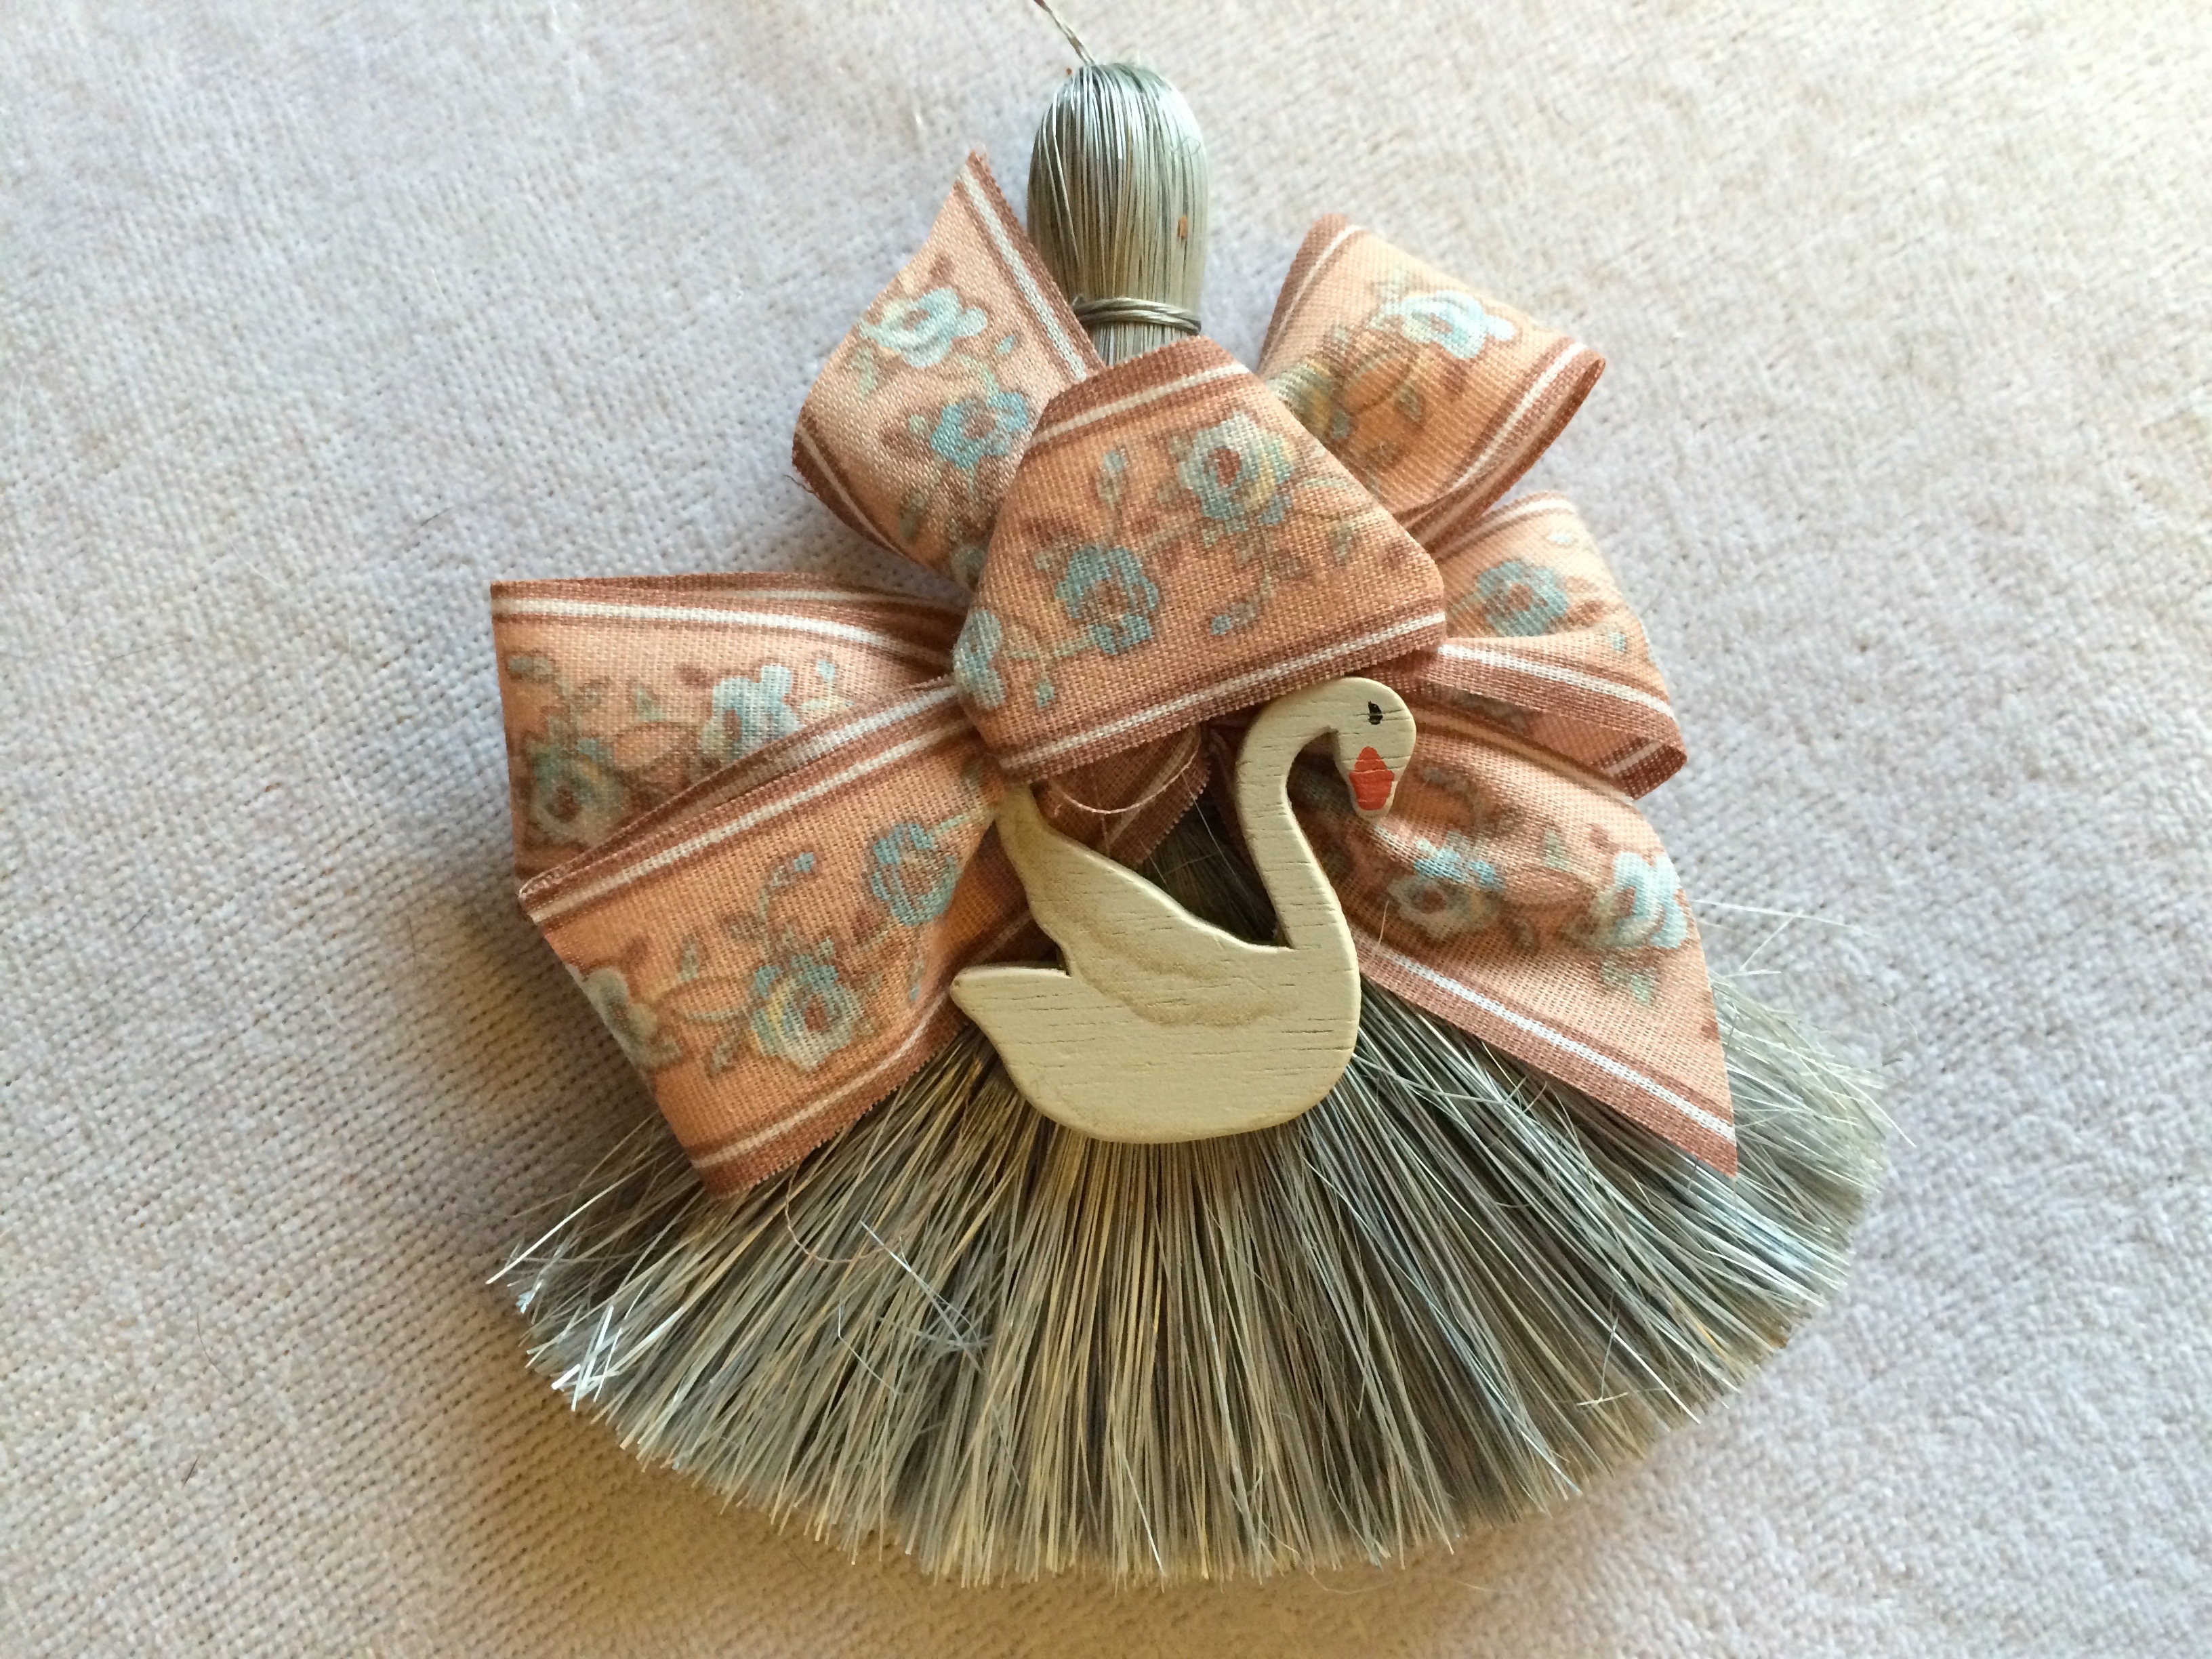 Vintage 1980s Dried Flowers & Wooden Swan Broom Ornament by Annabelle\'s Angels